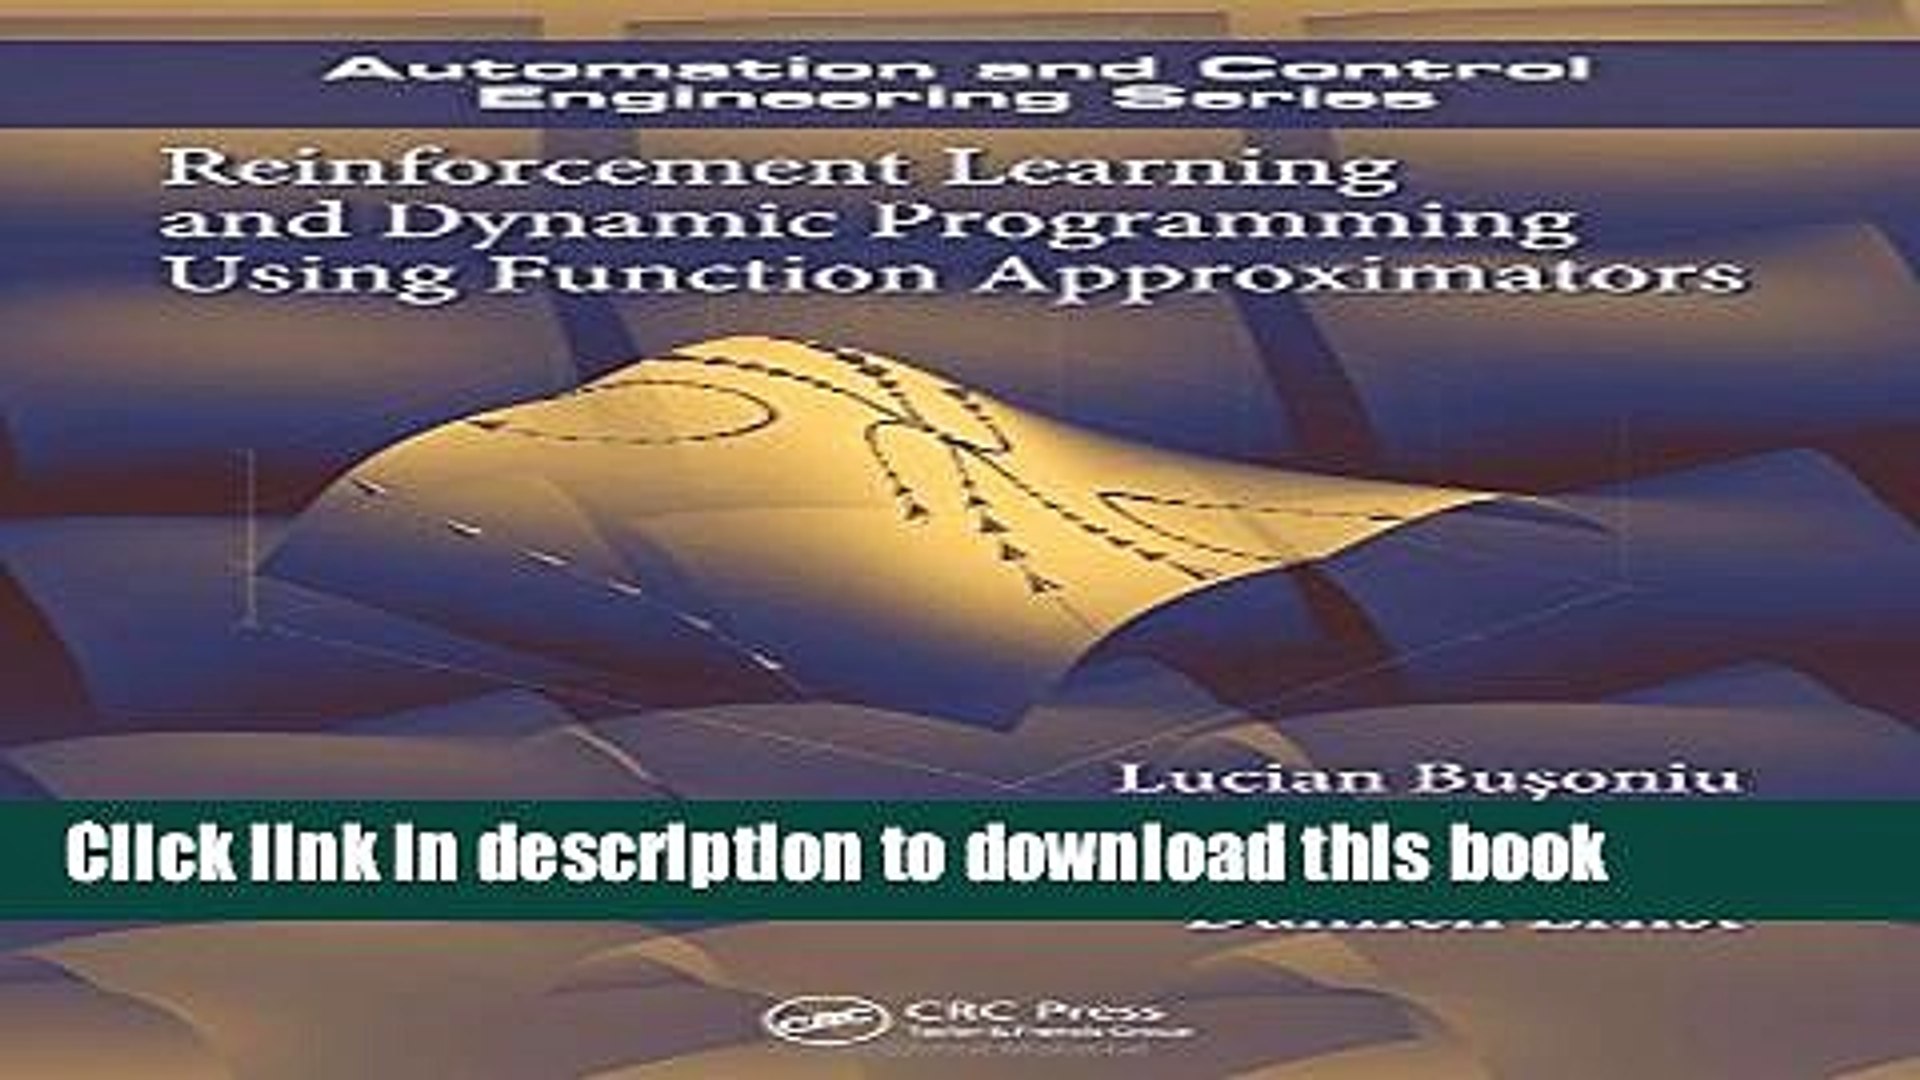 Read Reinforcement Learning and Dynamic Programming Using Function Approximators (Automation and